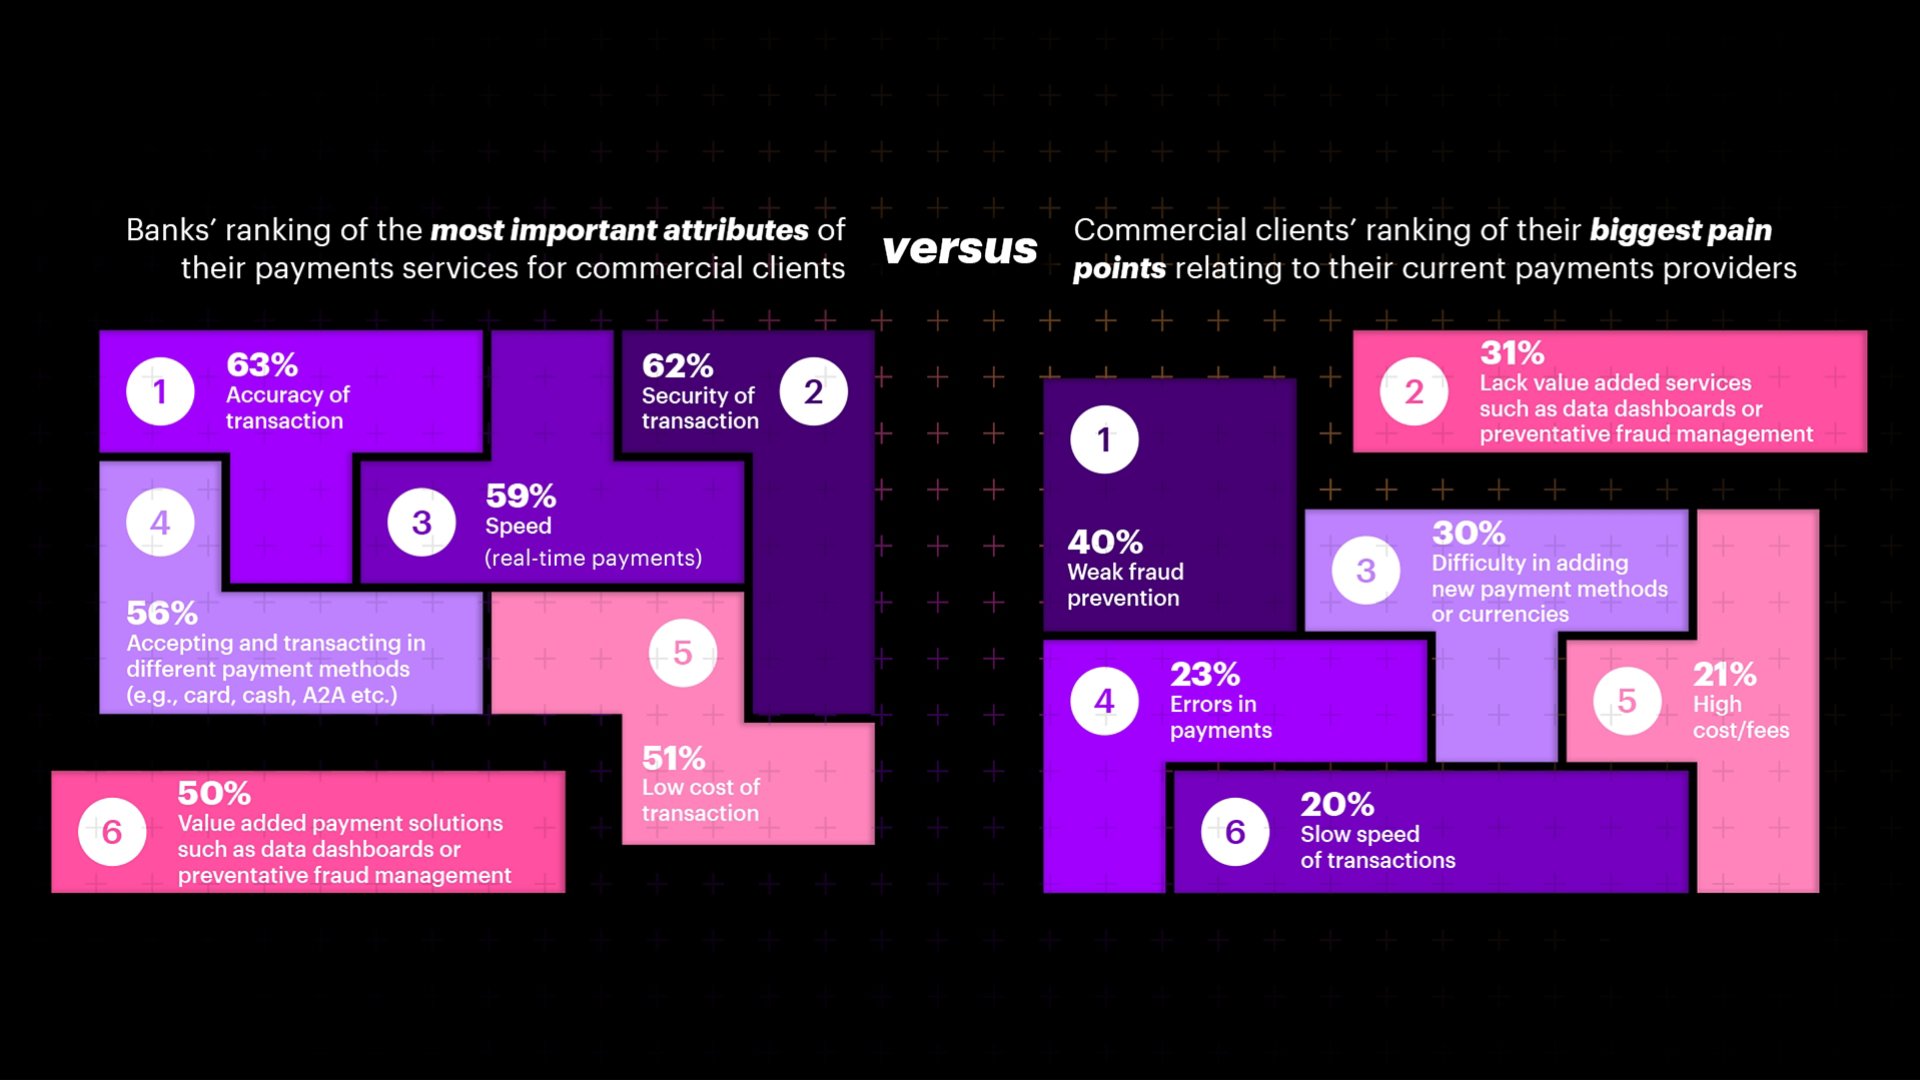 Puzzle-style chart comparing the most important attributes of payments services for commercial clients versus the biggest pain points related to current payments providers.